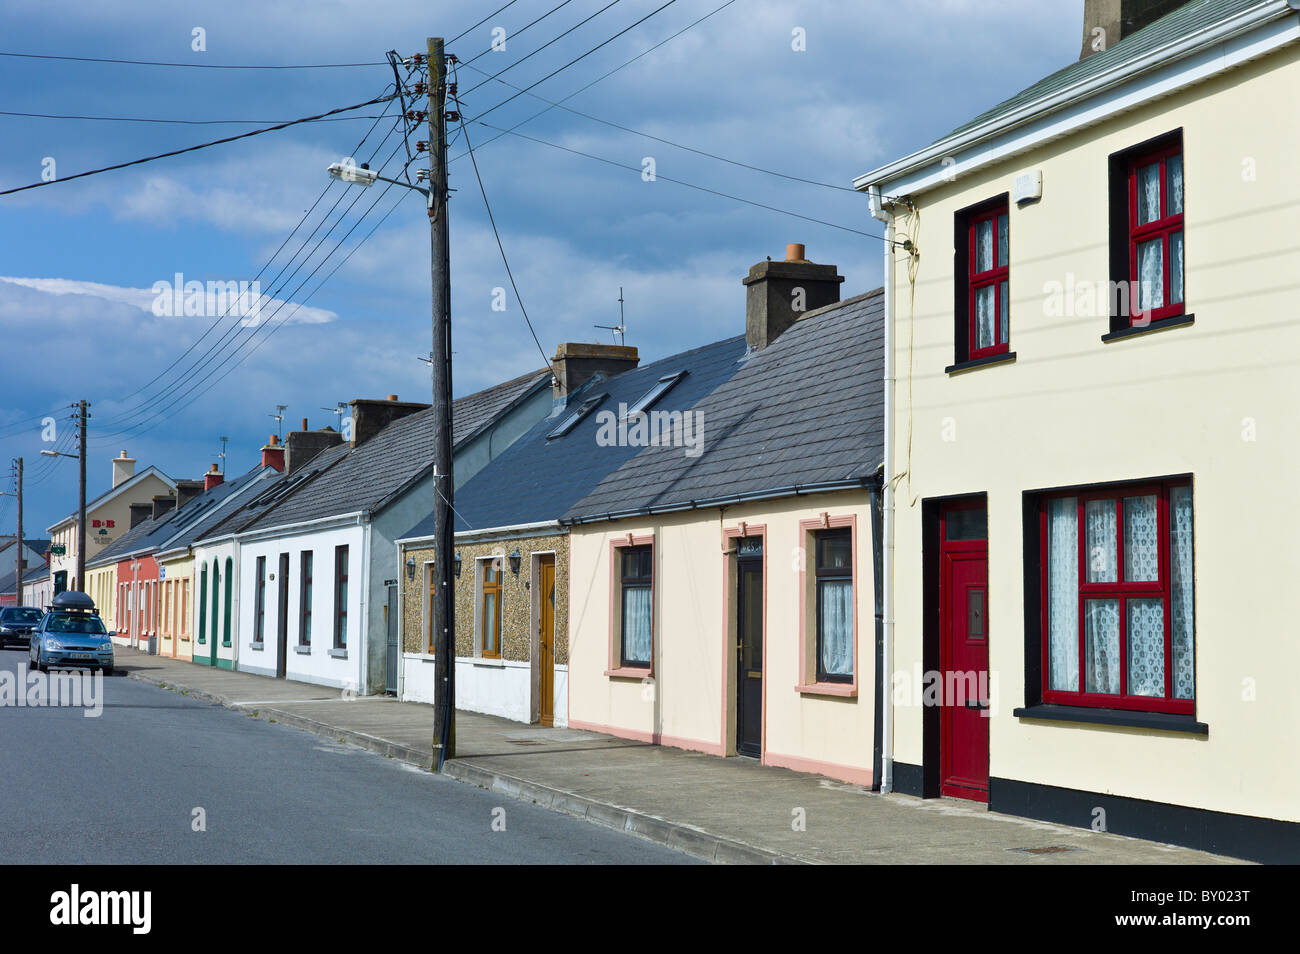 Street scene pastel painted terraced homes in Kilkee, County Clare, West of Ireland Stock Photo